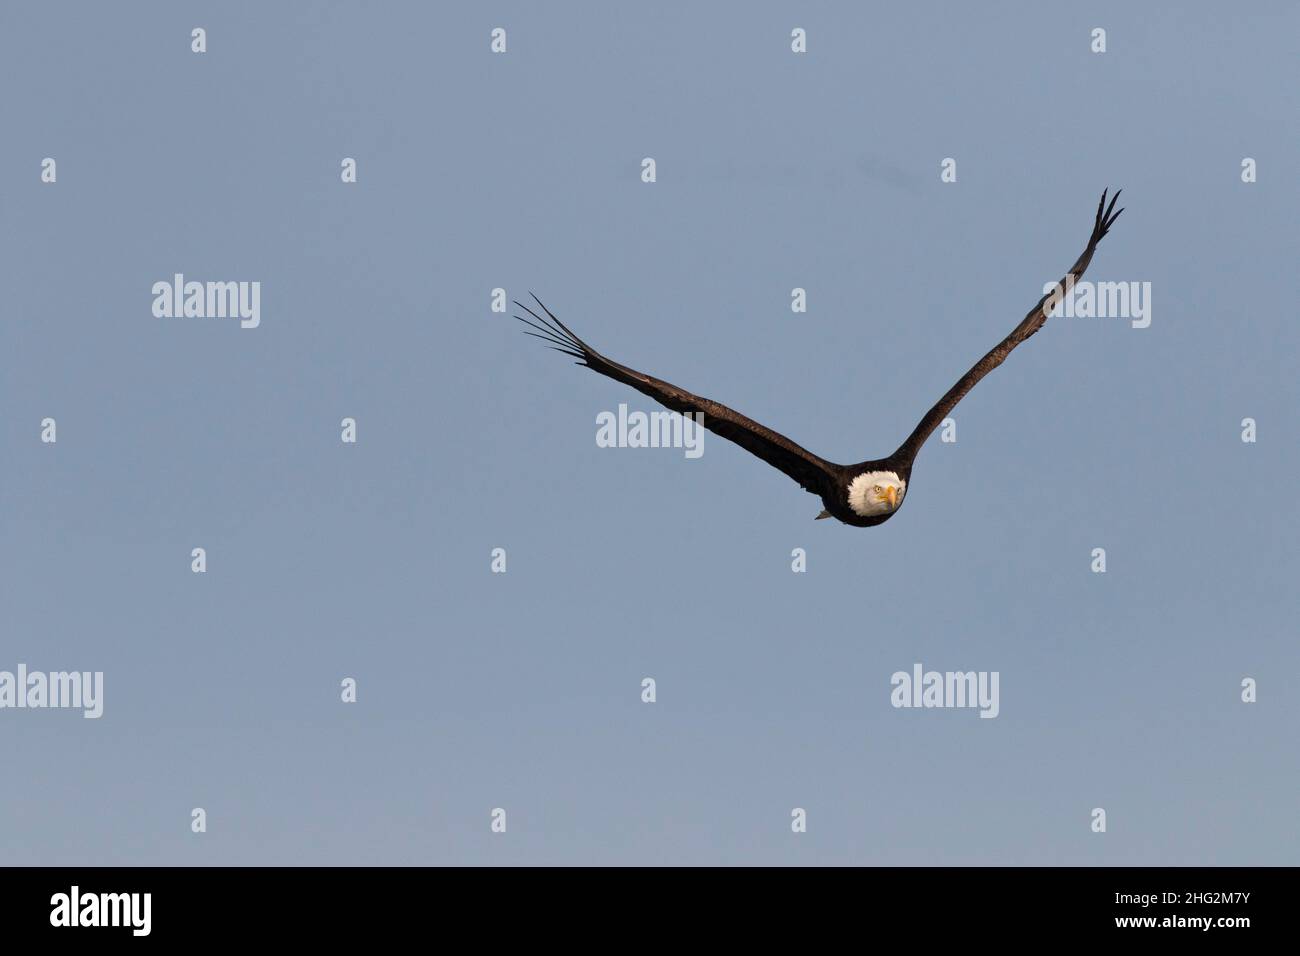 An adult Bald Eagle, Haliaeetus leucocephalus, exhibits a V-shaped wingspan over the San Joaquin Valley. Stock Photo